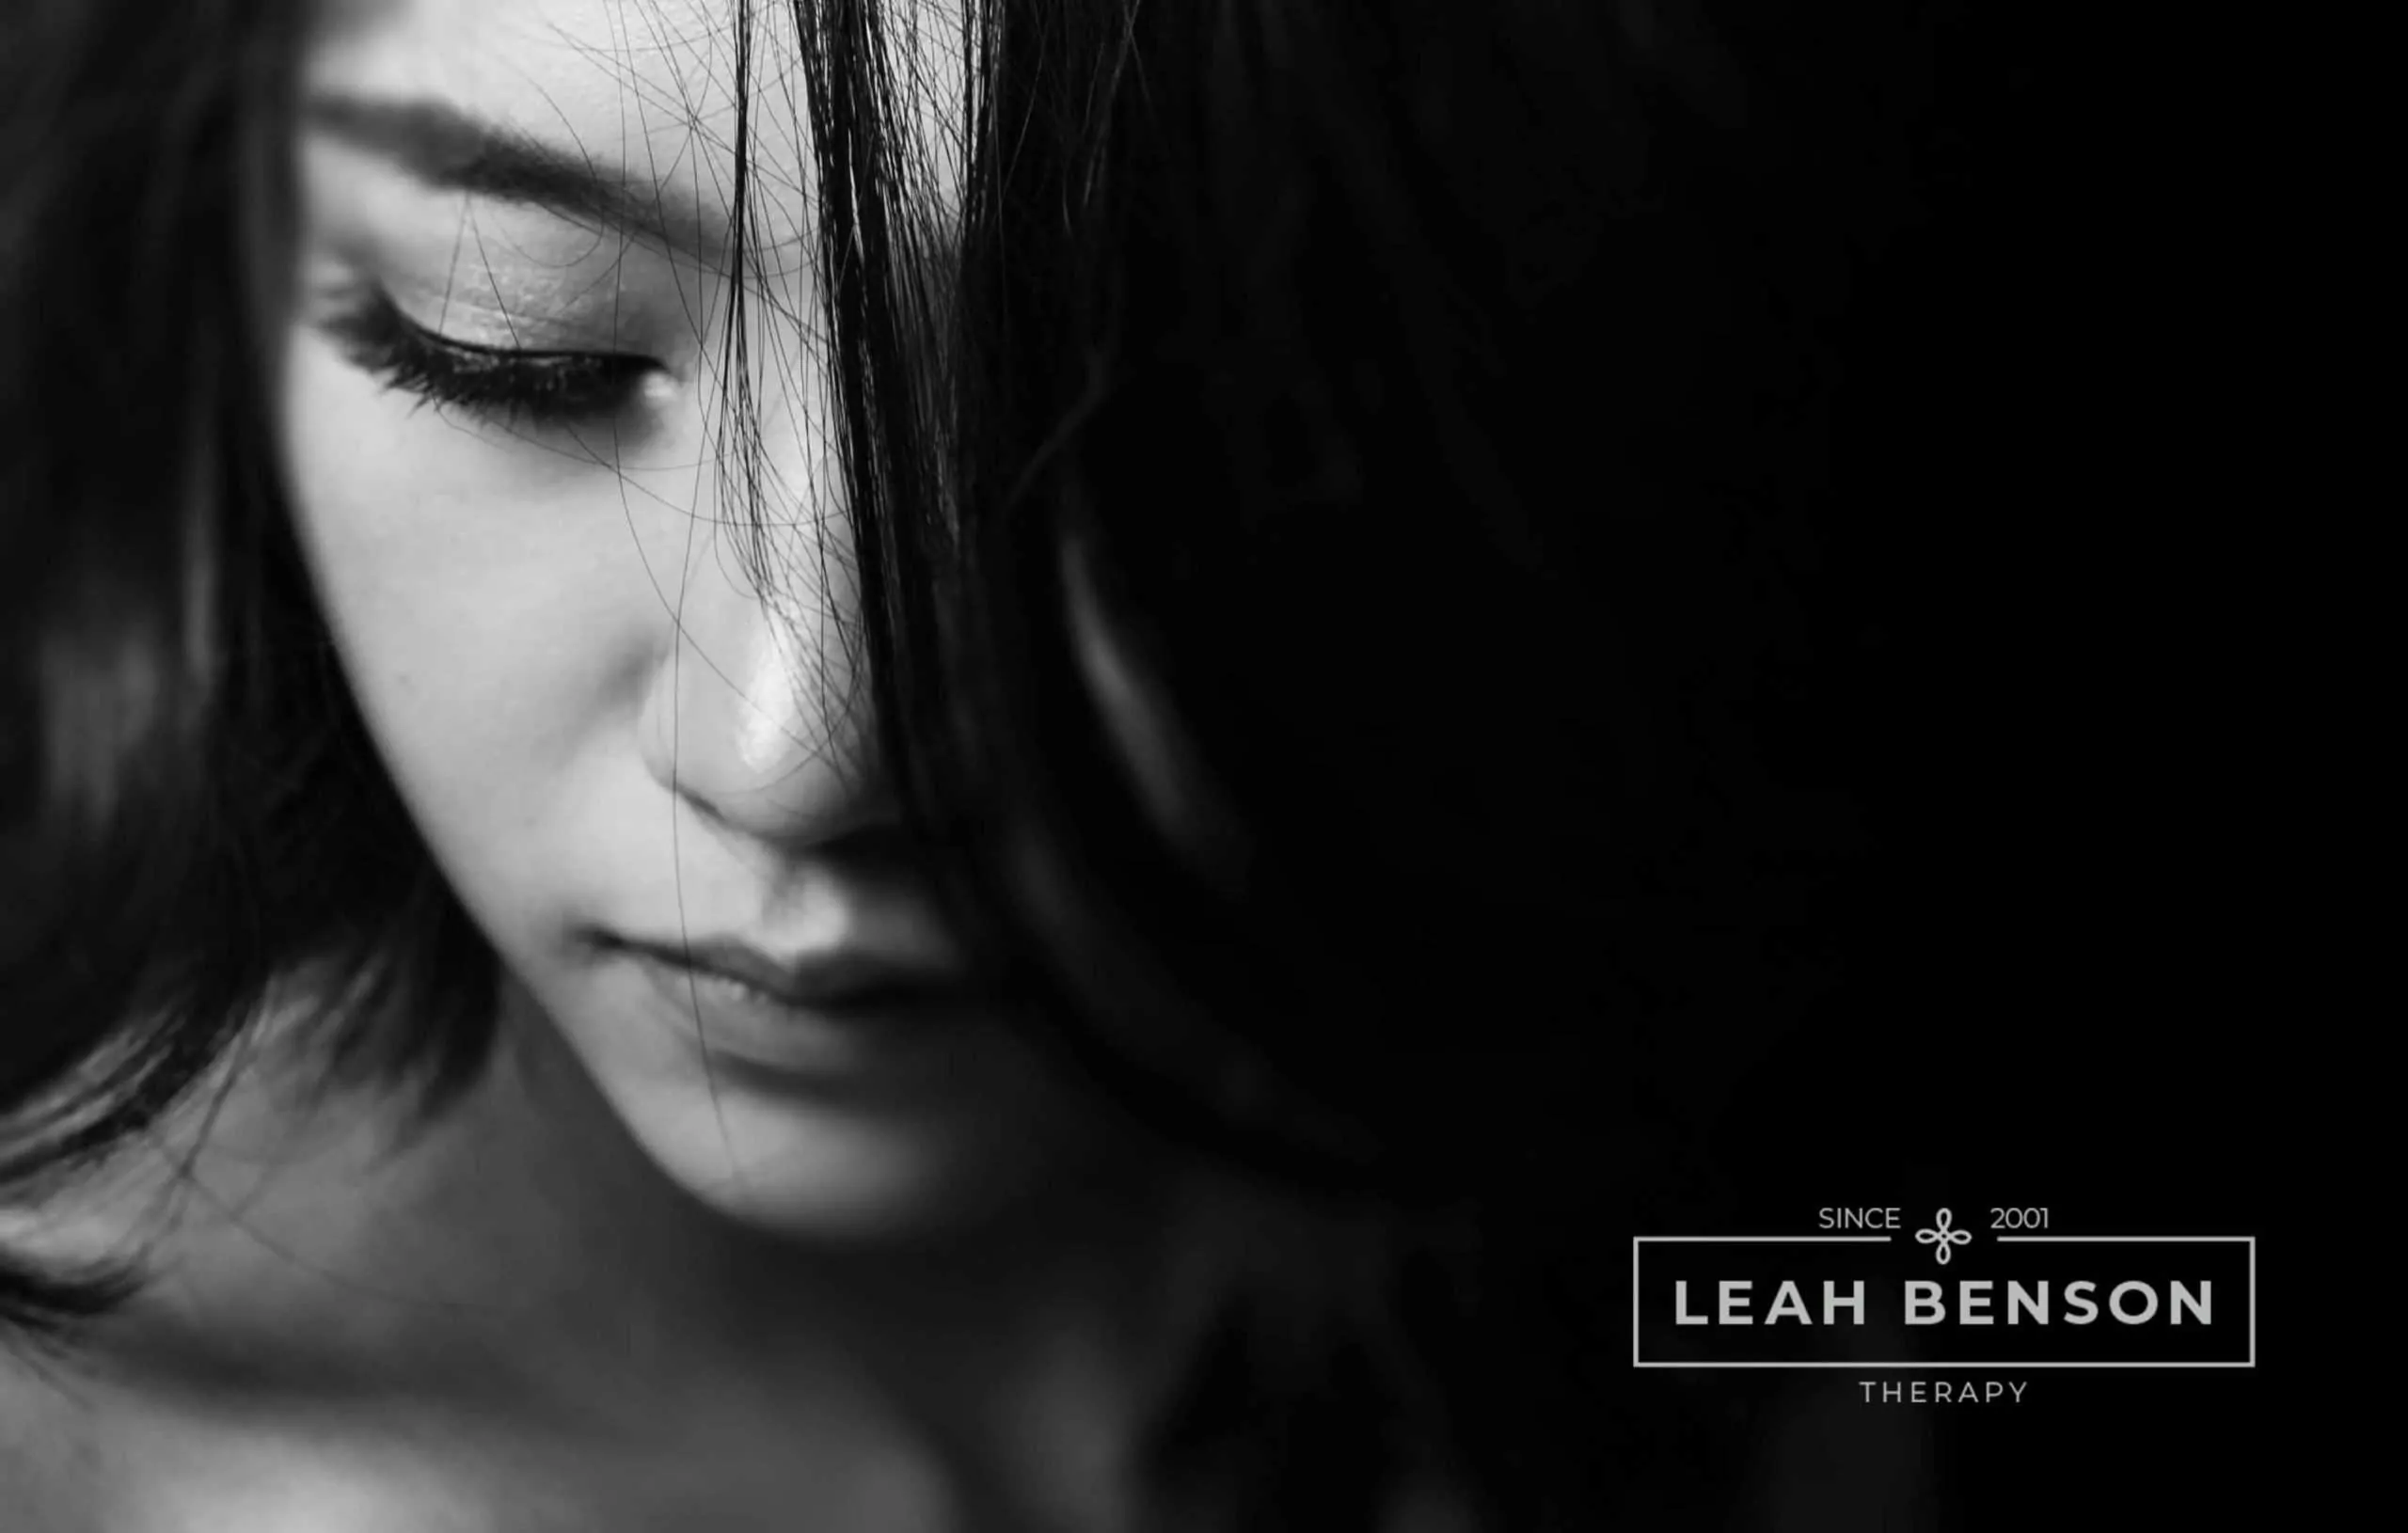 pensive attractive young women dealing with a breakup. LEAH BENSON THERAPY logo shown